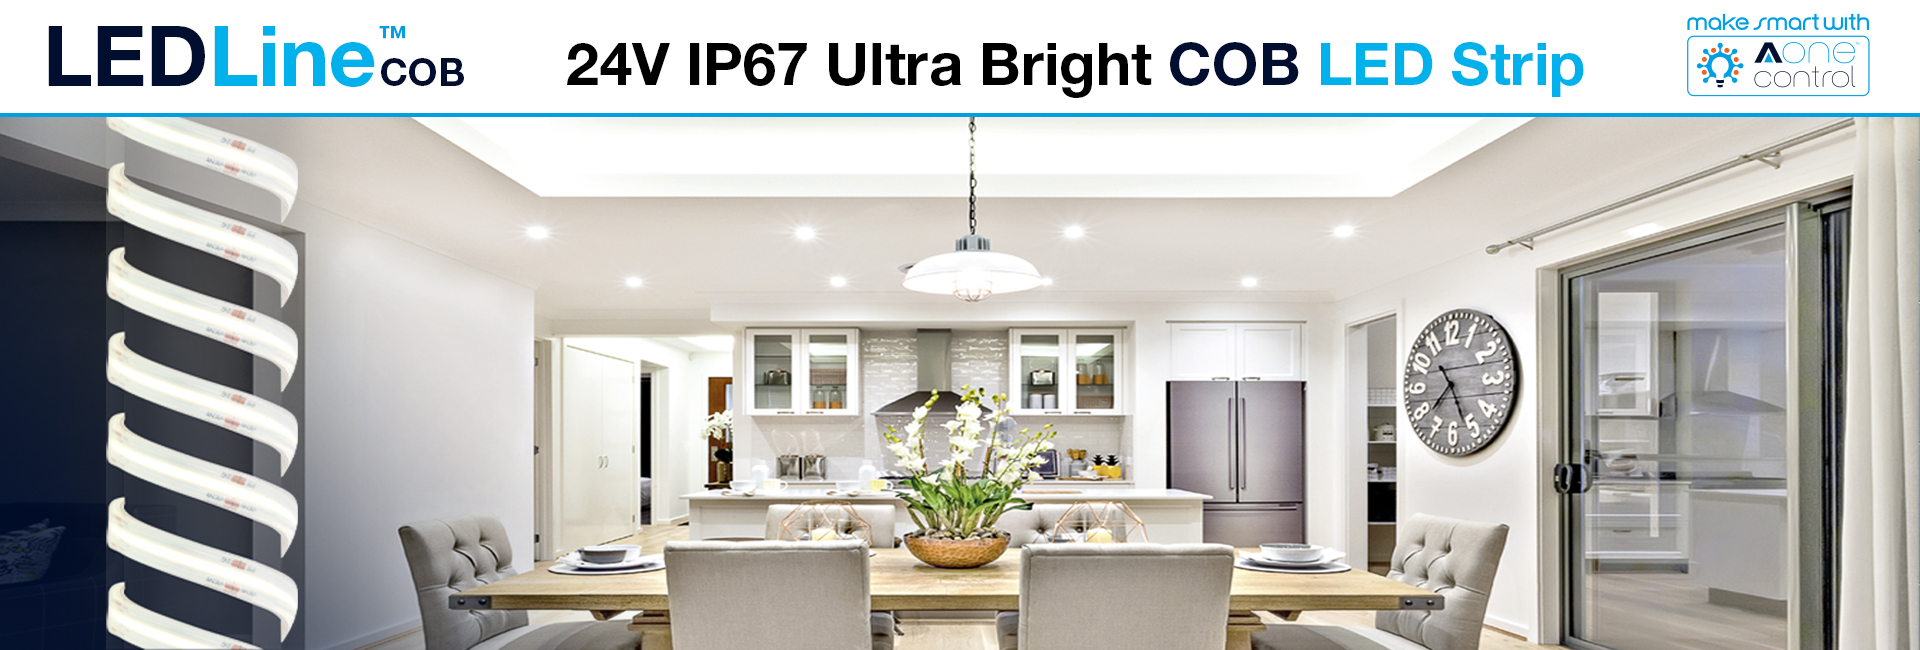 Show products in category New LEDLine™ COB ideal for Kitchens, Cinema Rooms & more!